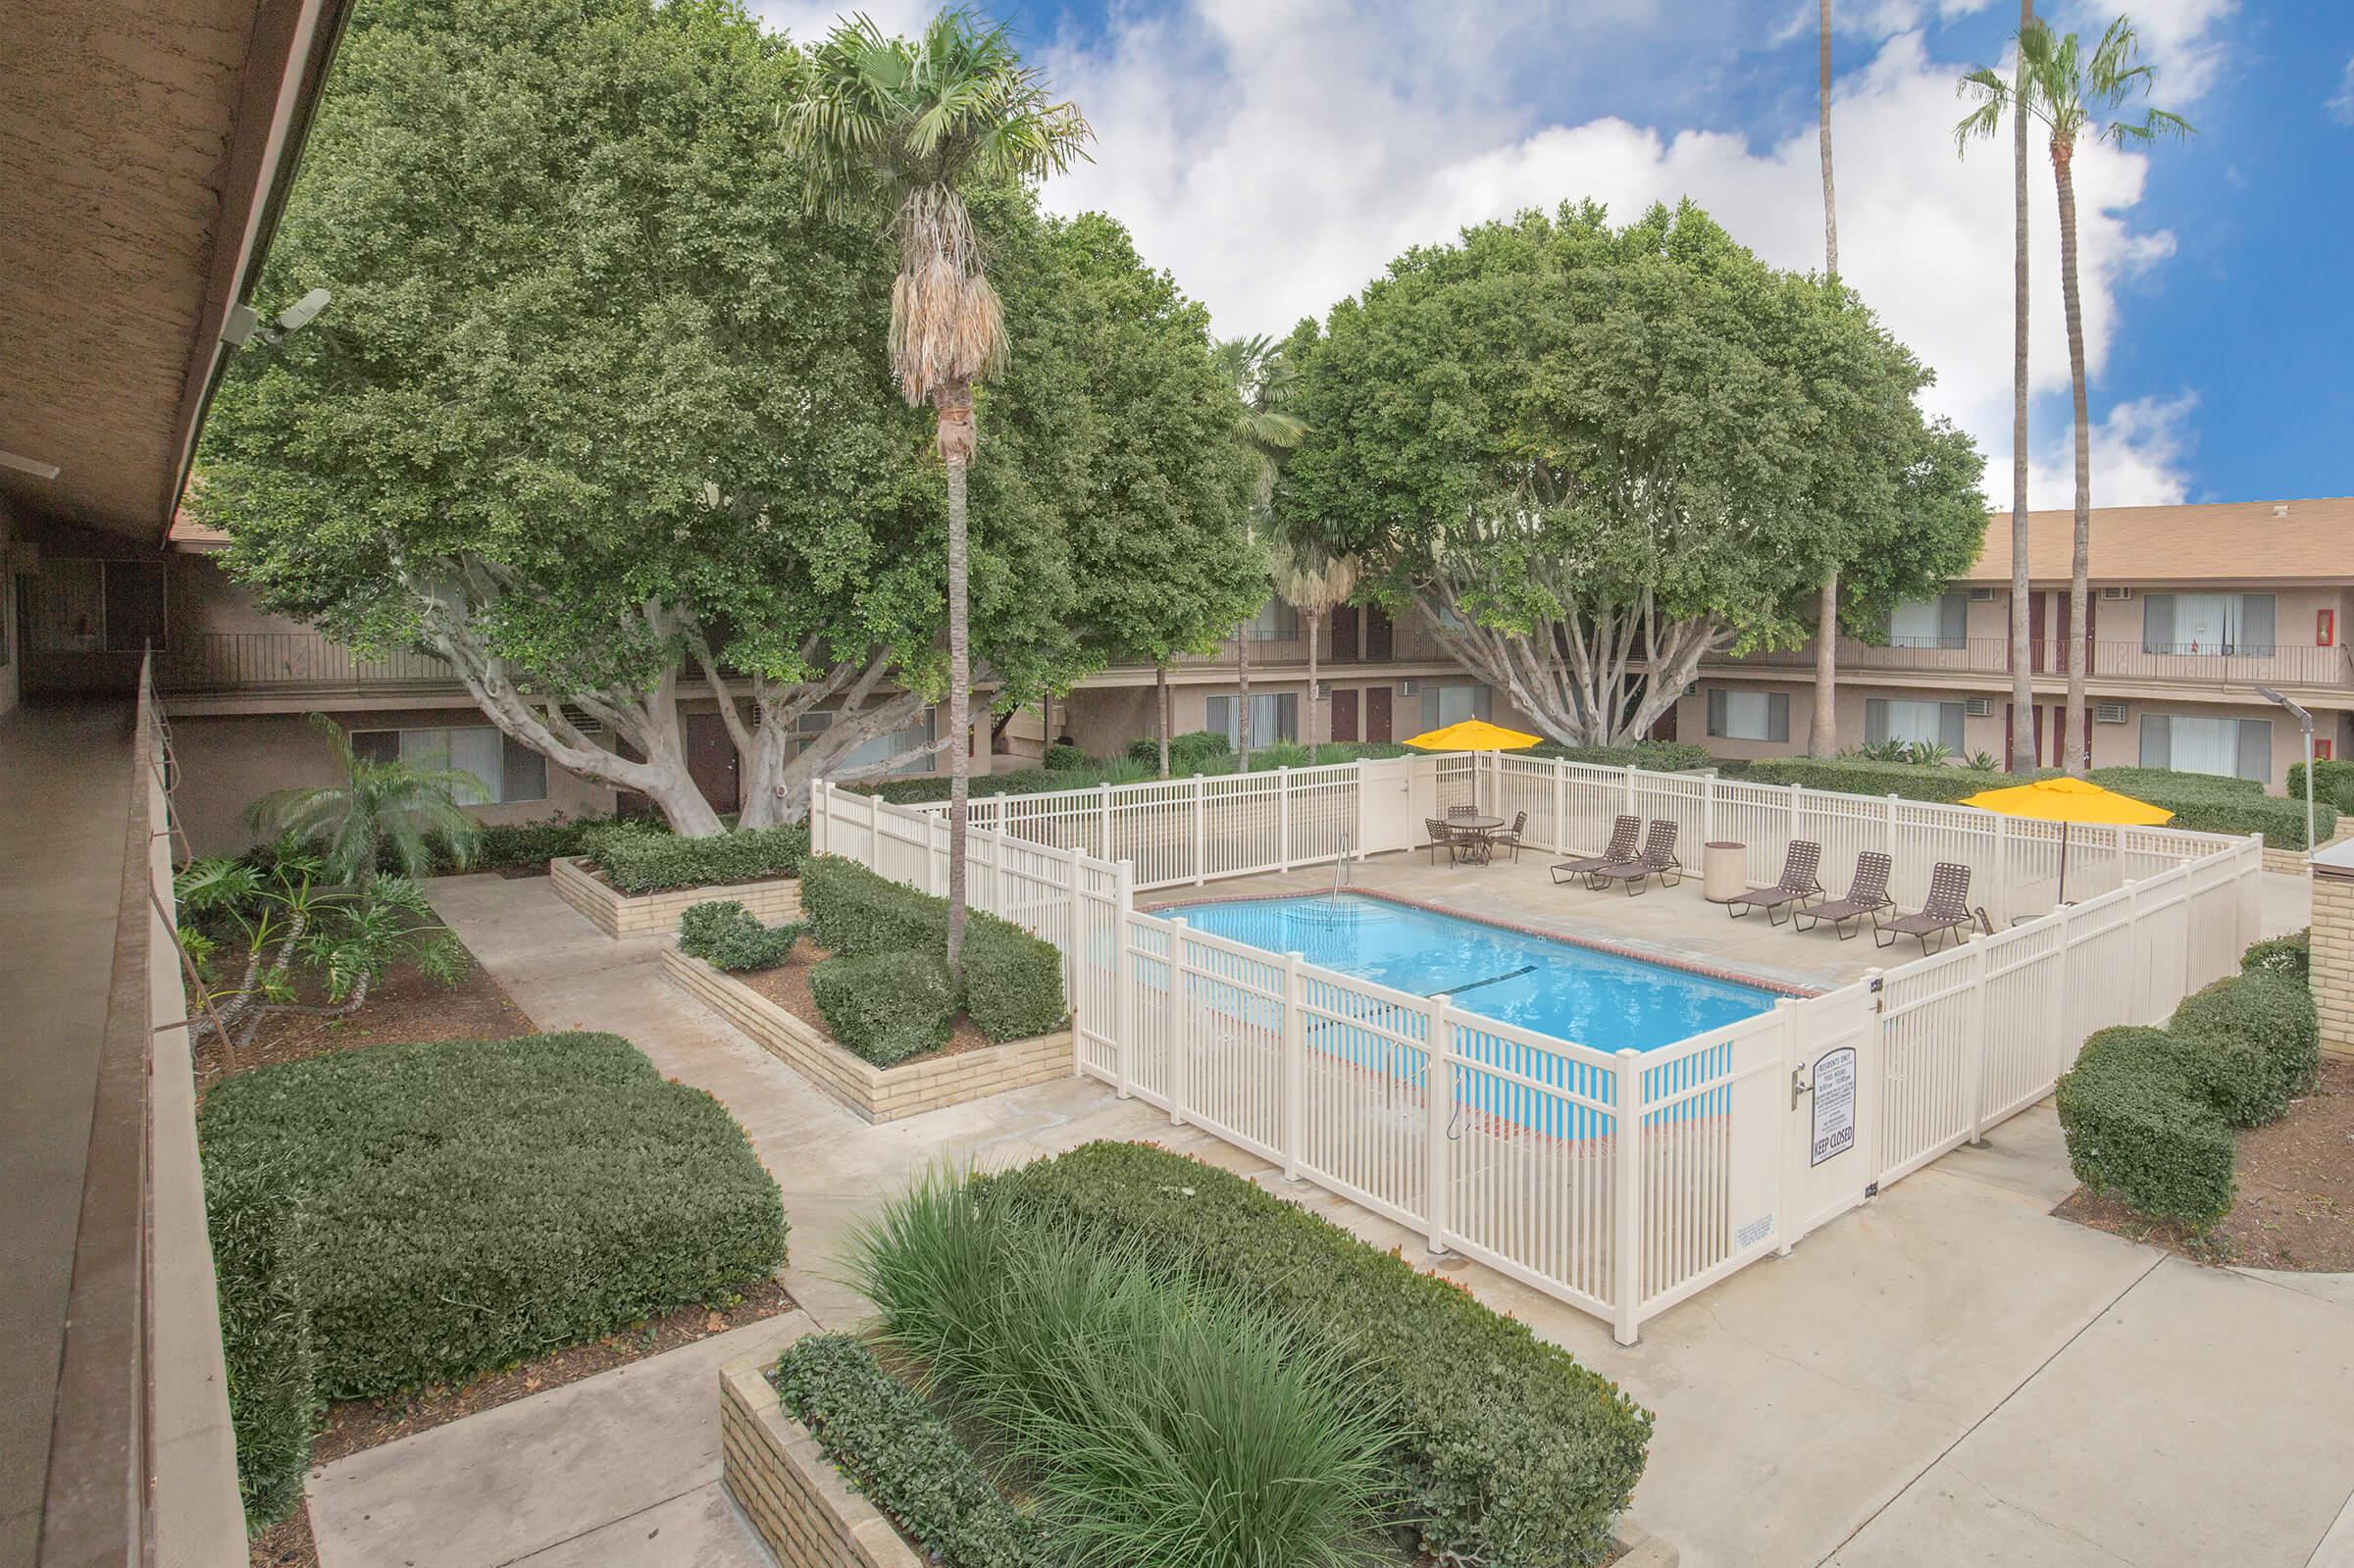 Castilian and Cordova Apartment Homes community pool surrounded by green landscaping